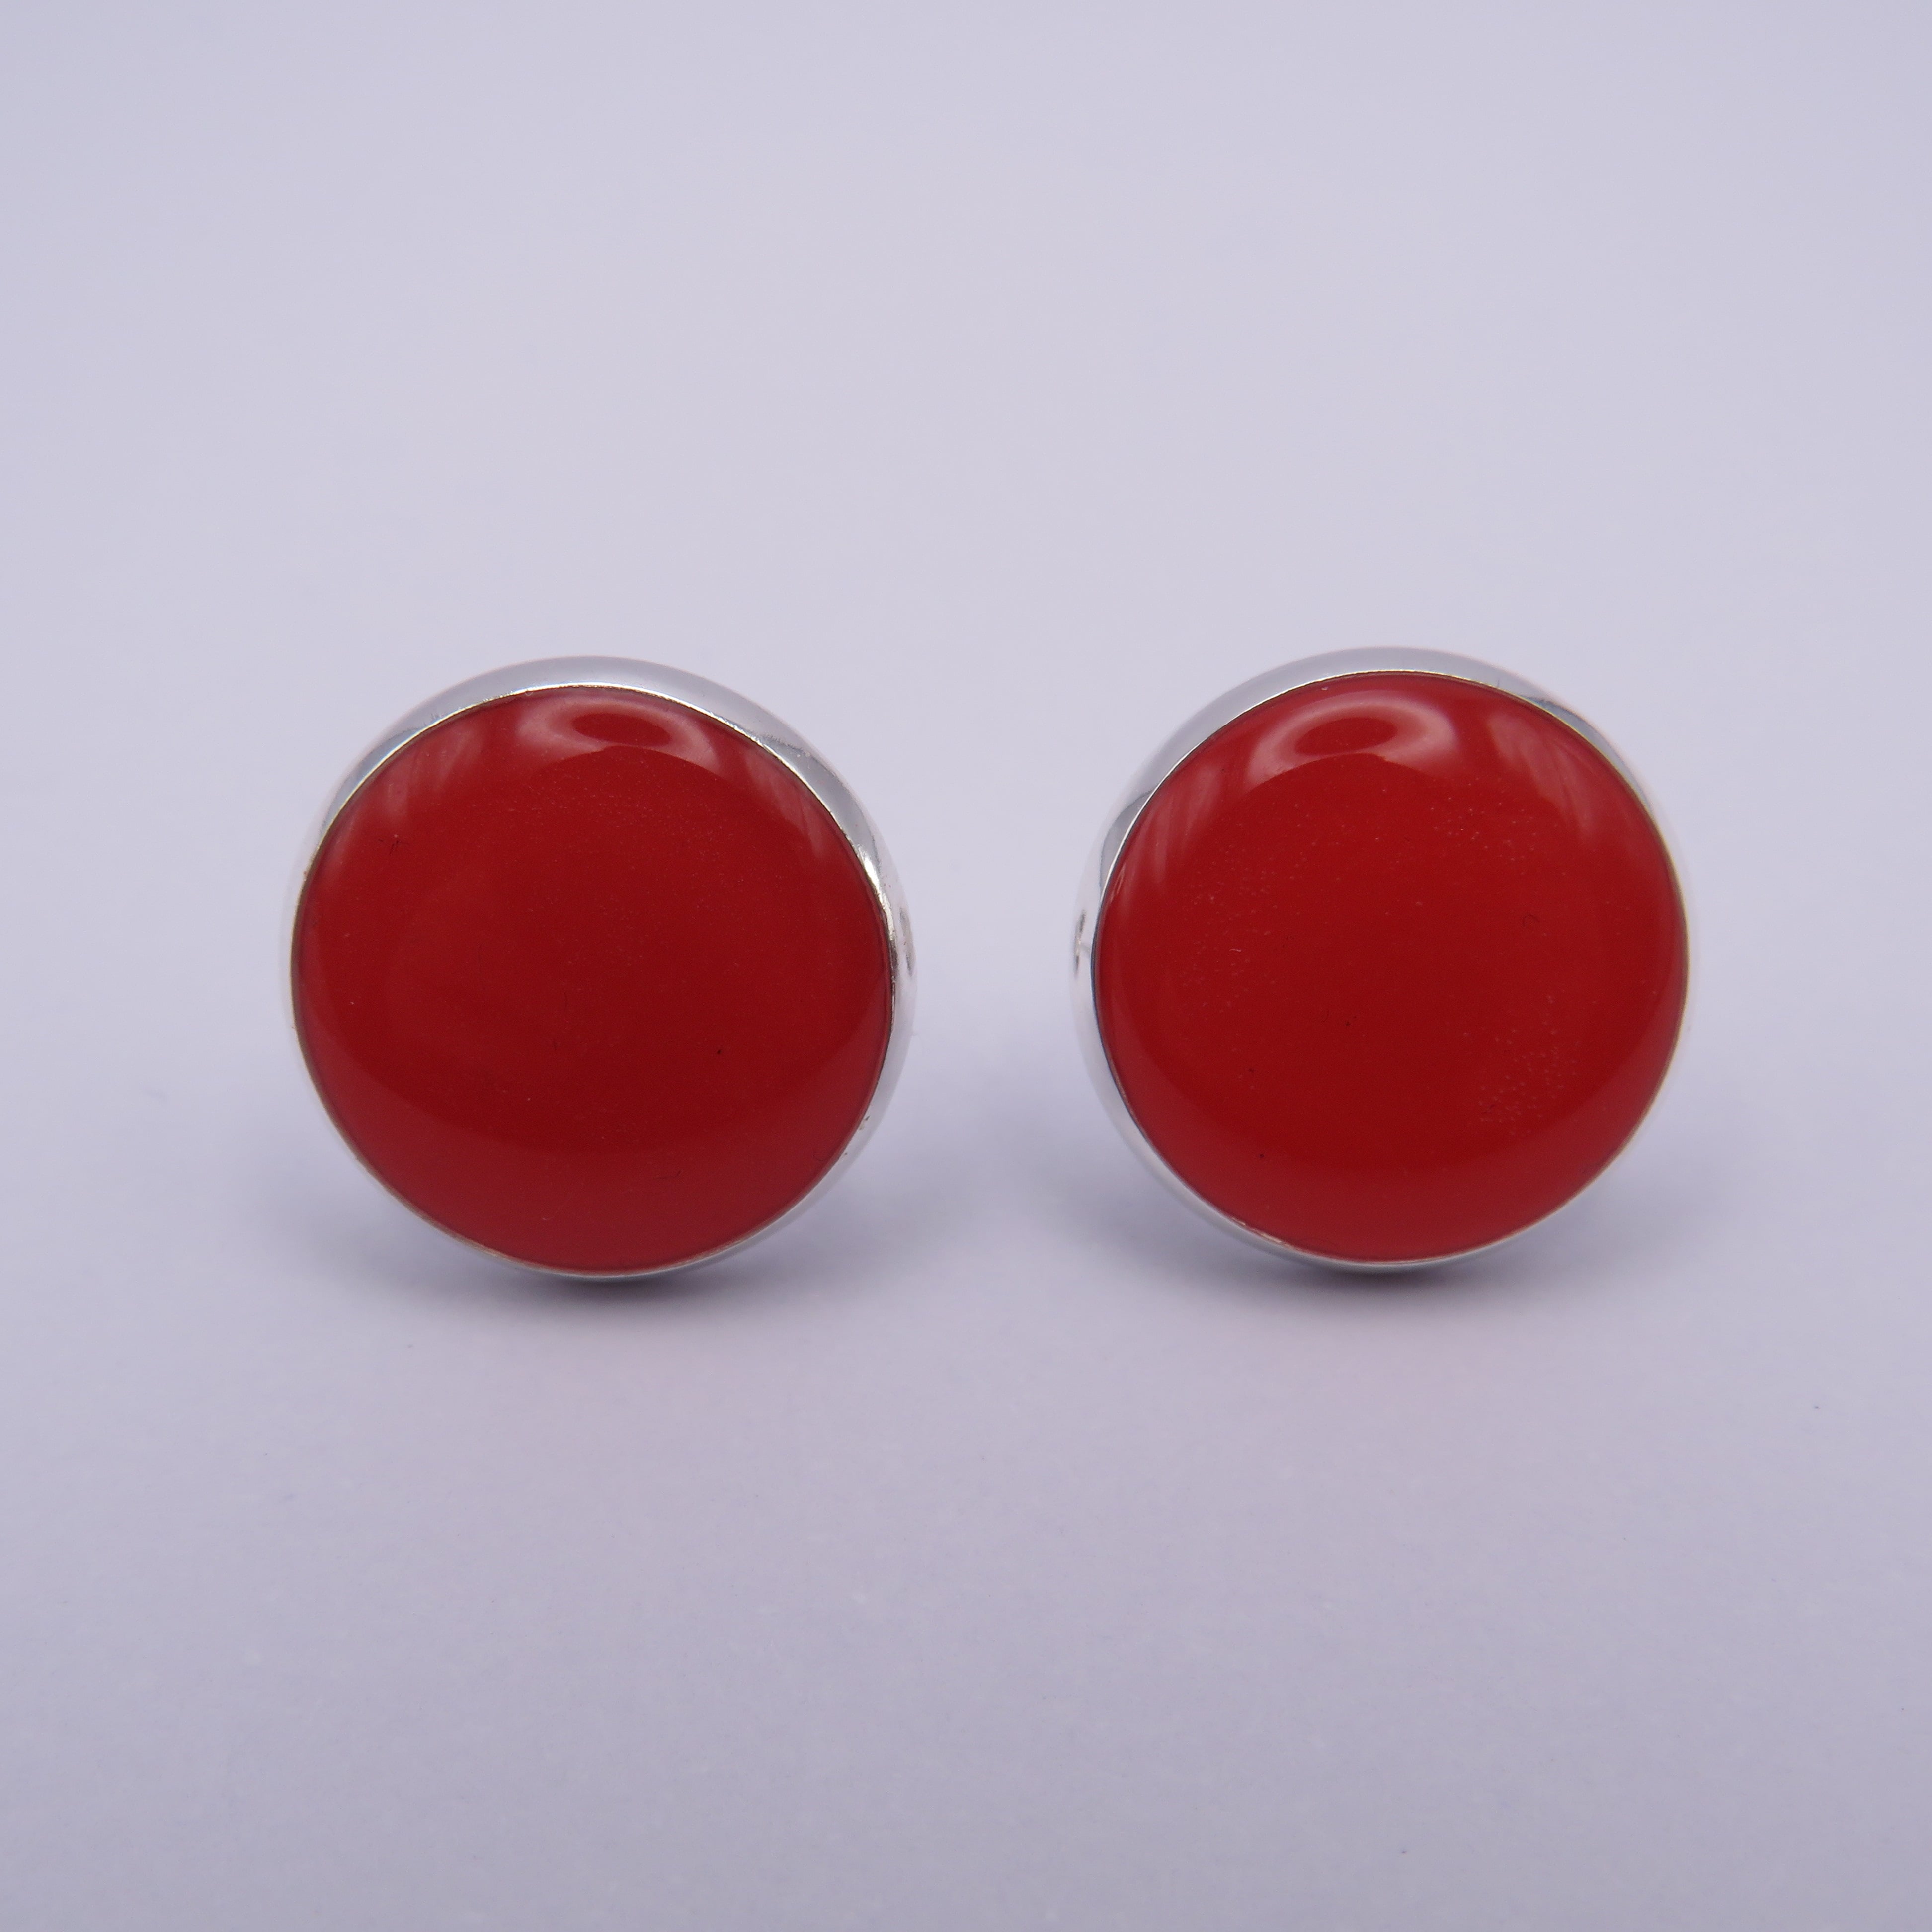 Stainless Steel Red Cabochon Stud Earrings